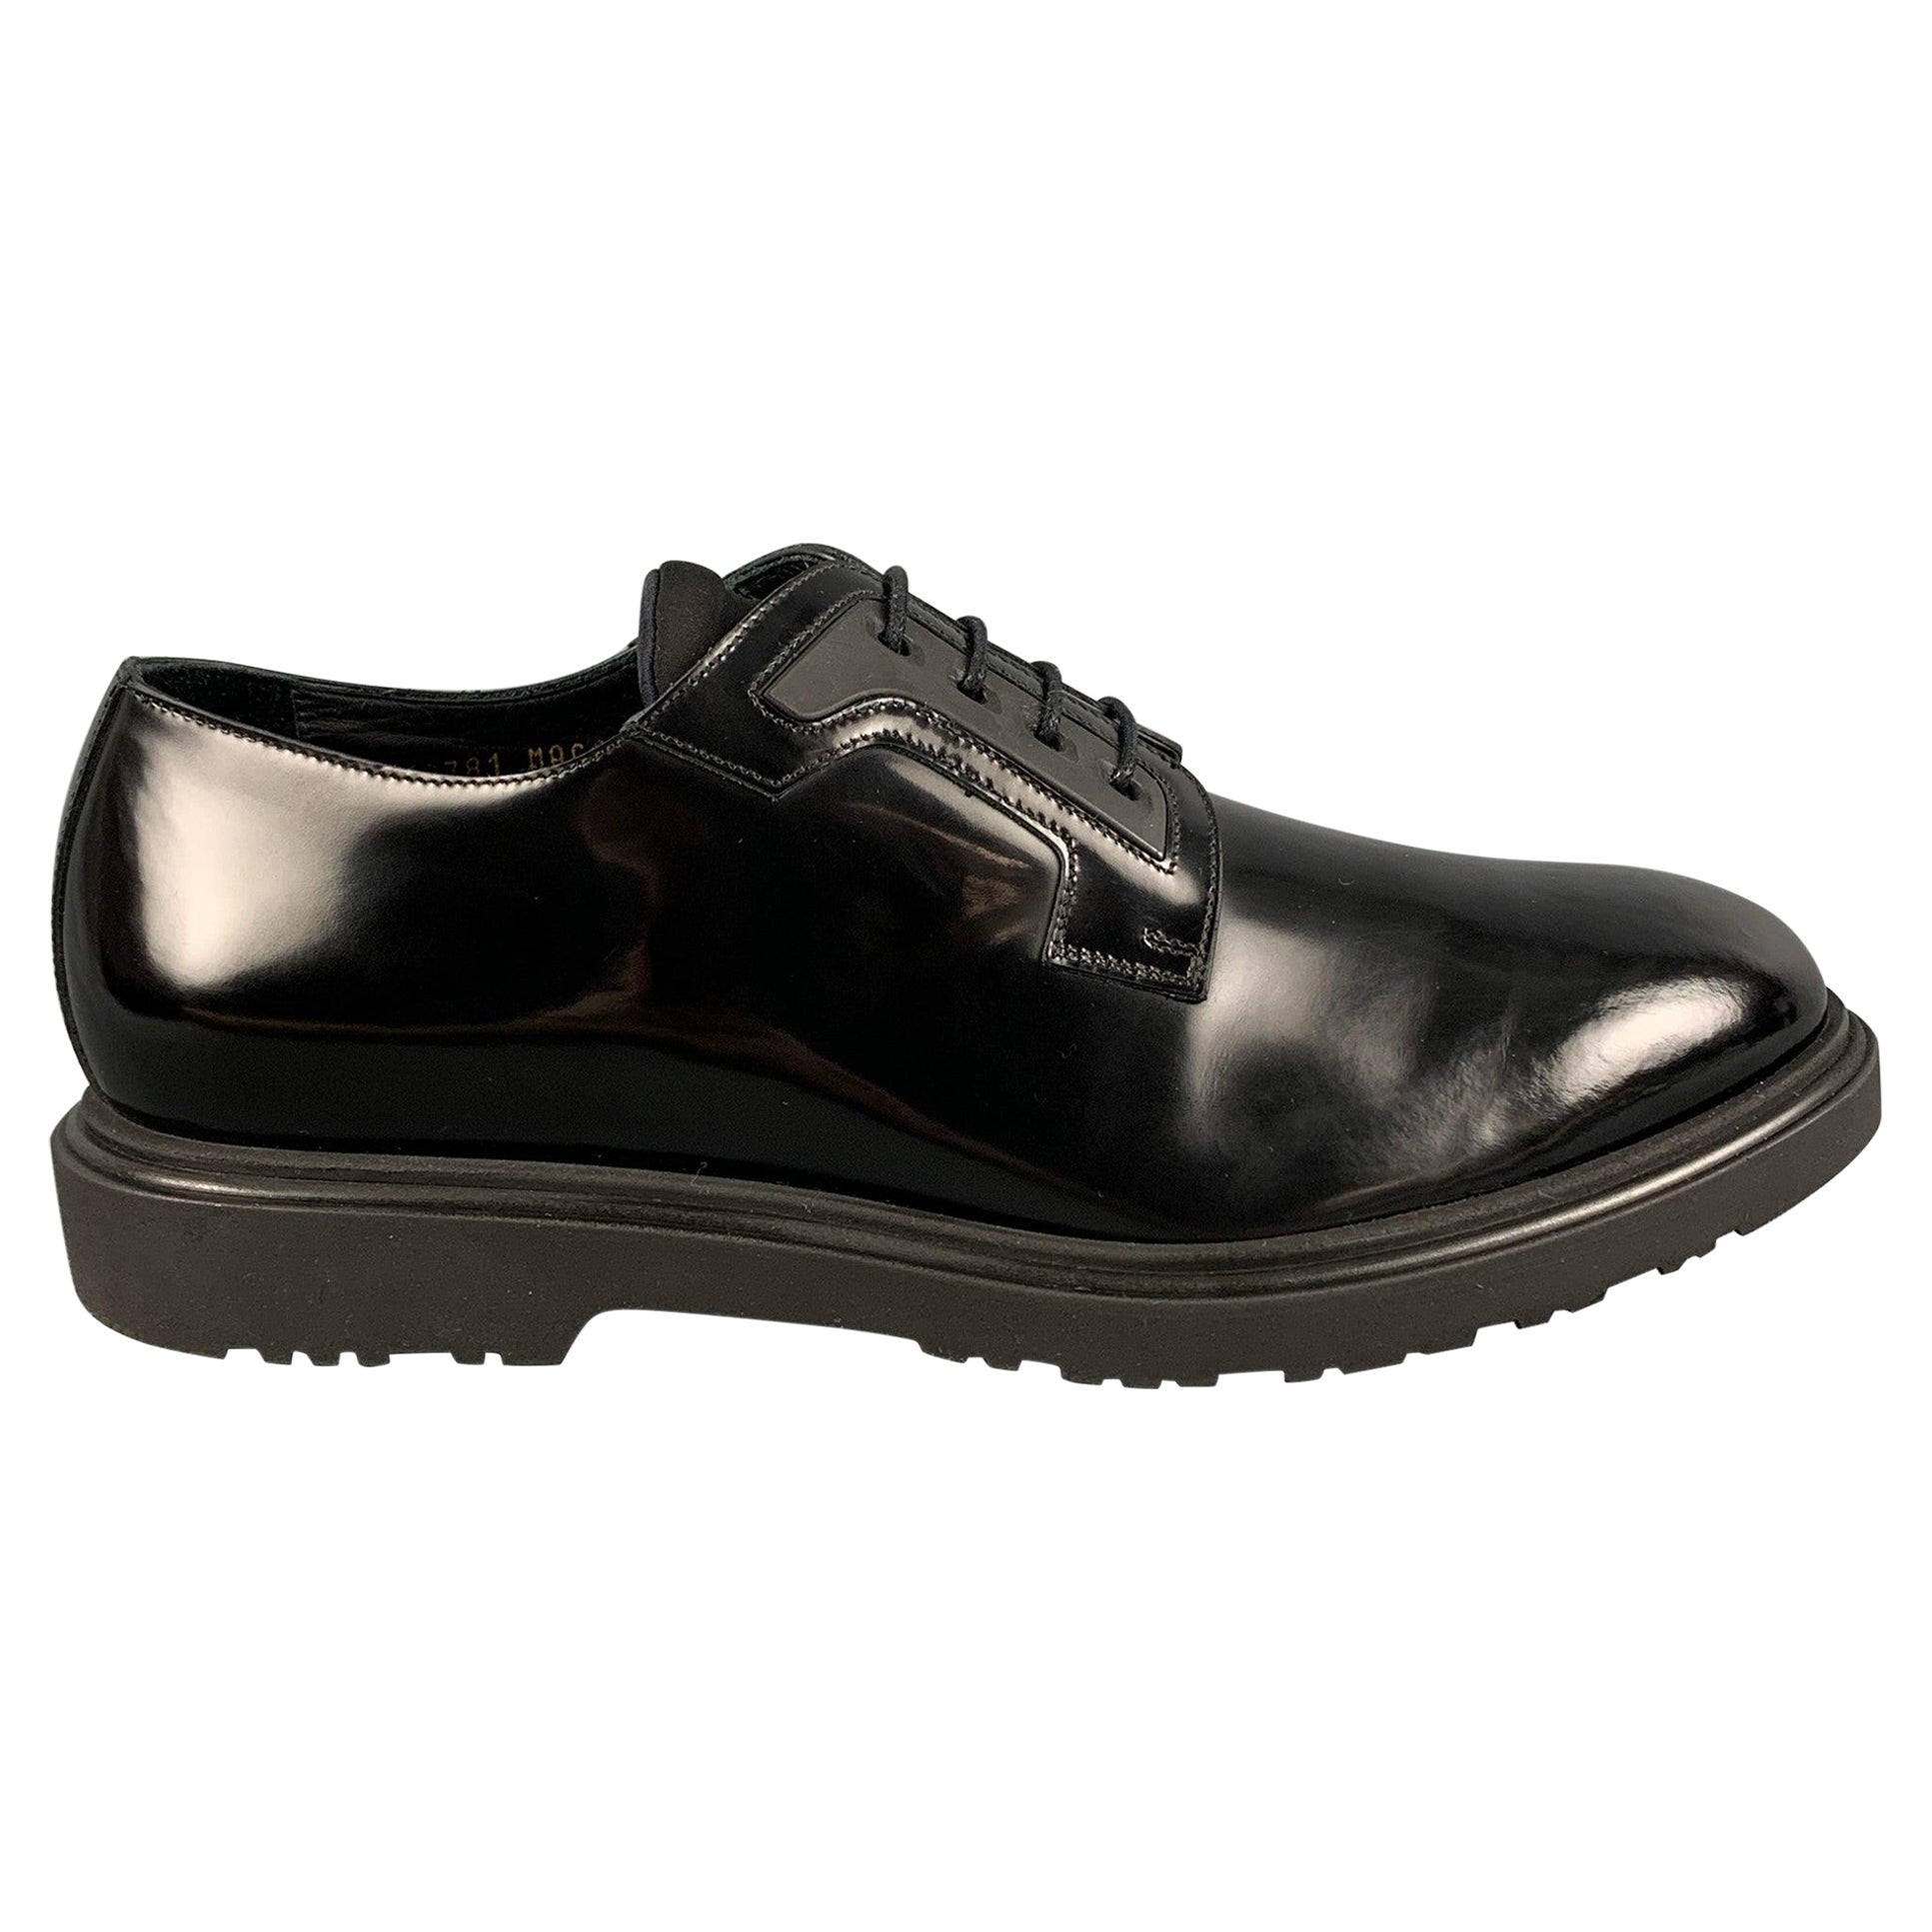 PAUL SMITH Size 11 Black Leather Lace Up Shoes For Sale